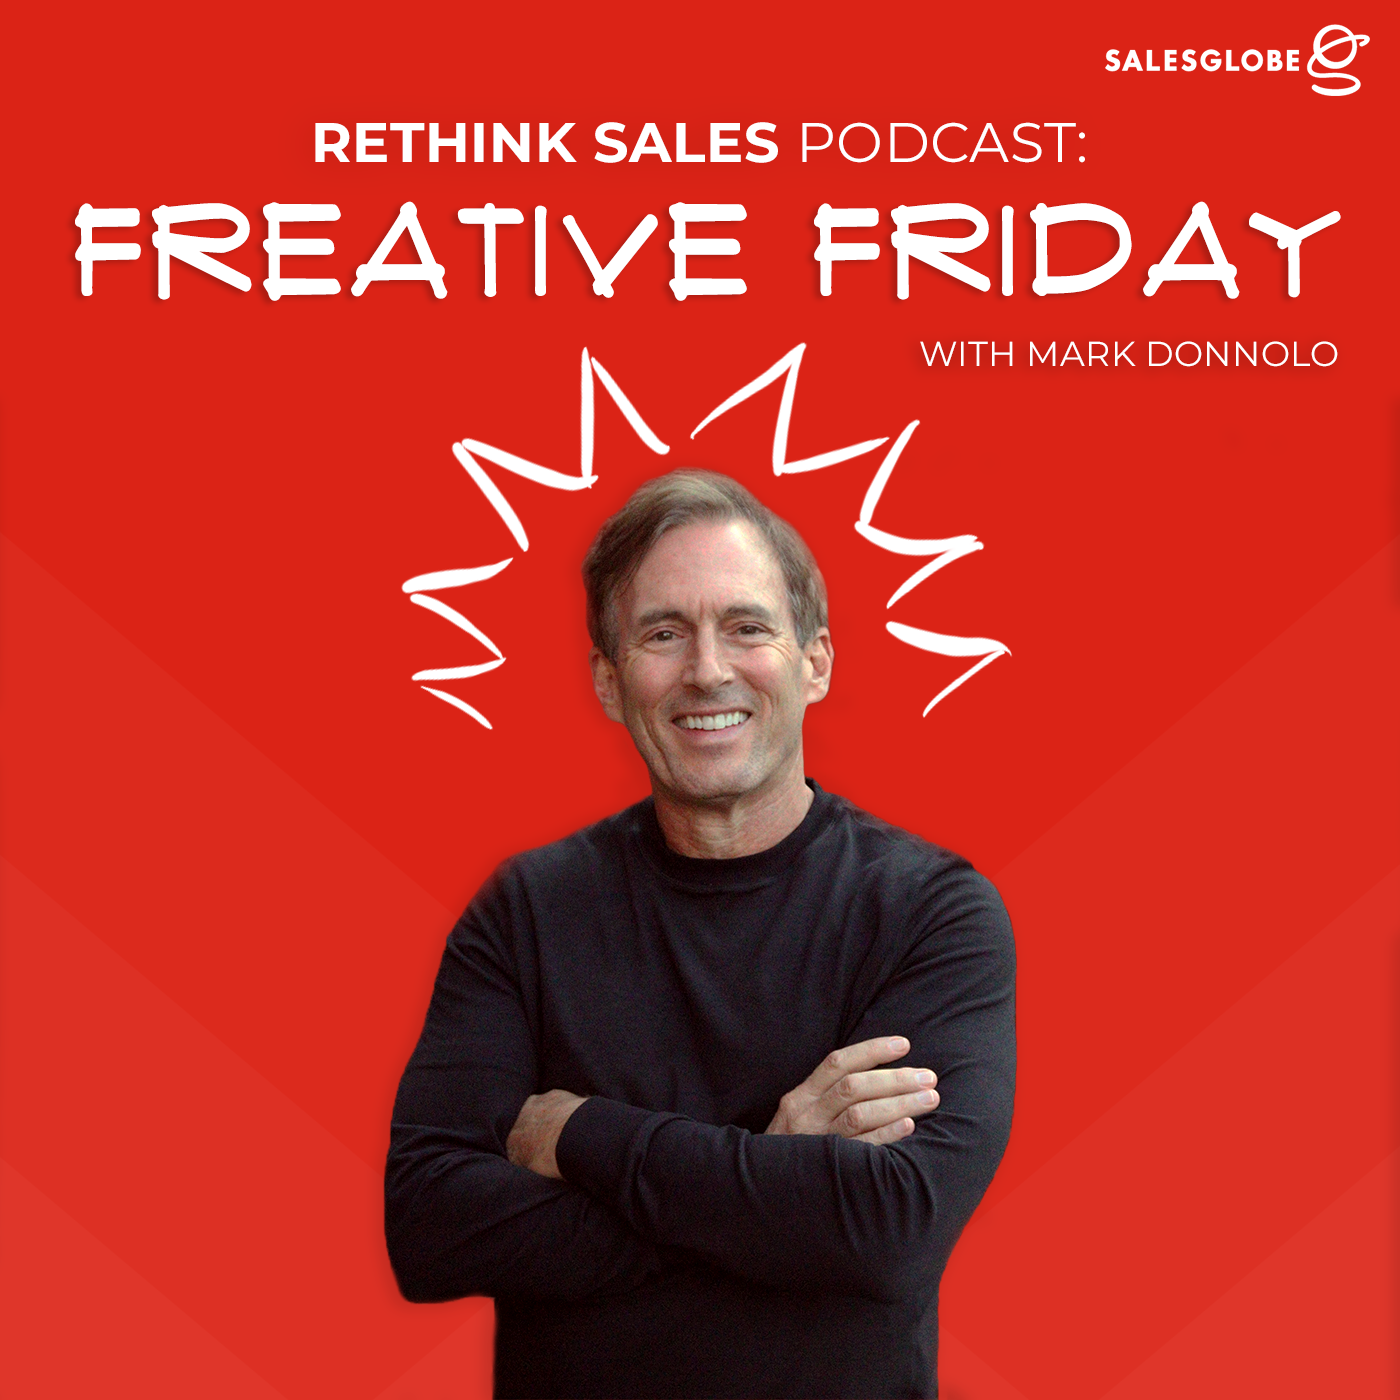 72: Freative Friday - Growing Strategic Accounts in an Uncertain Economy